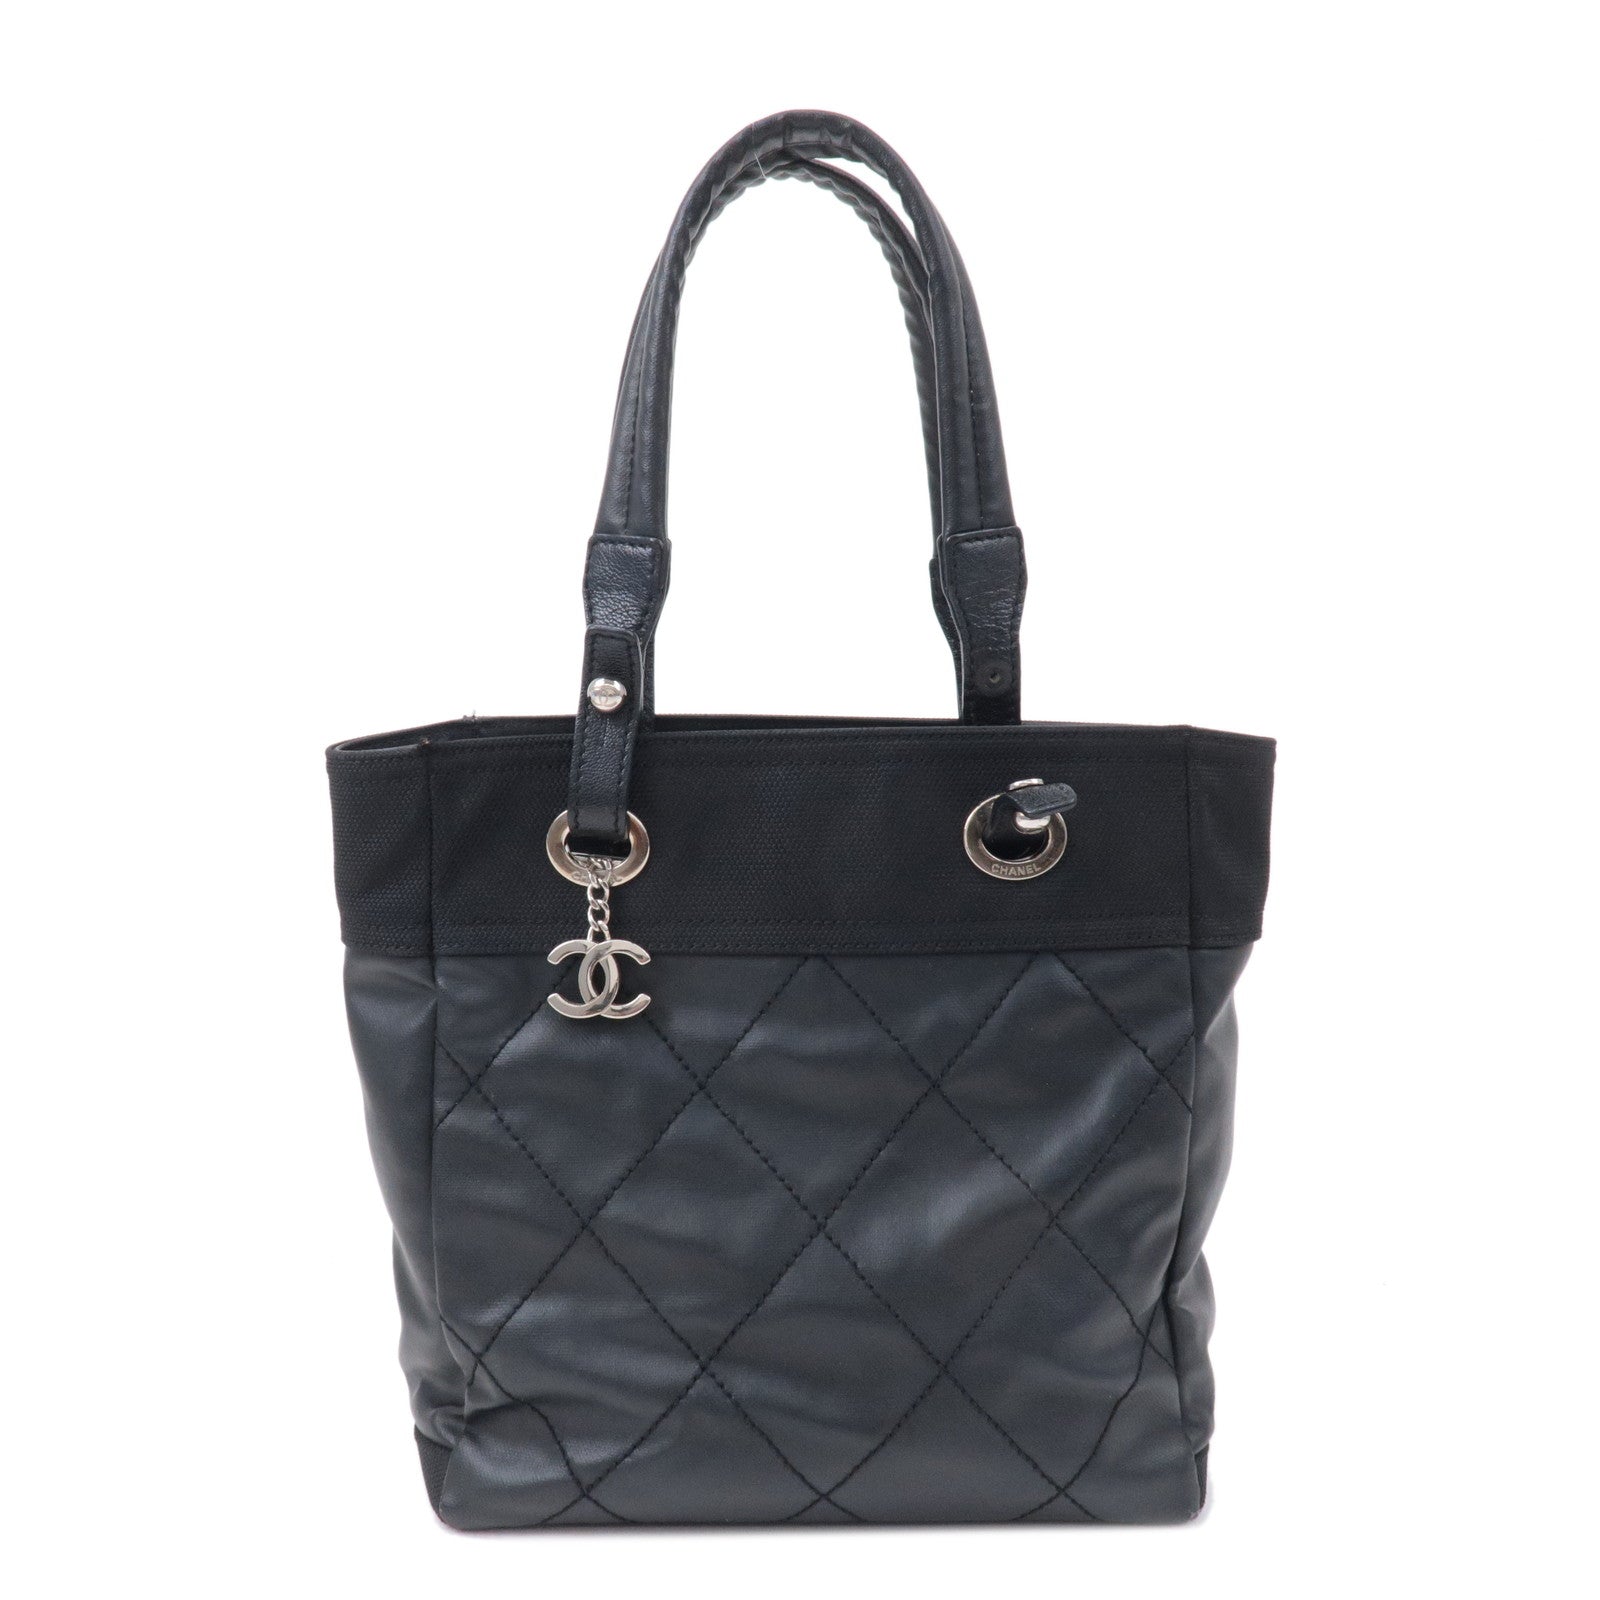 CHANEL Canvas Leather Tote Bag Black